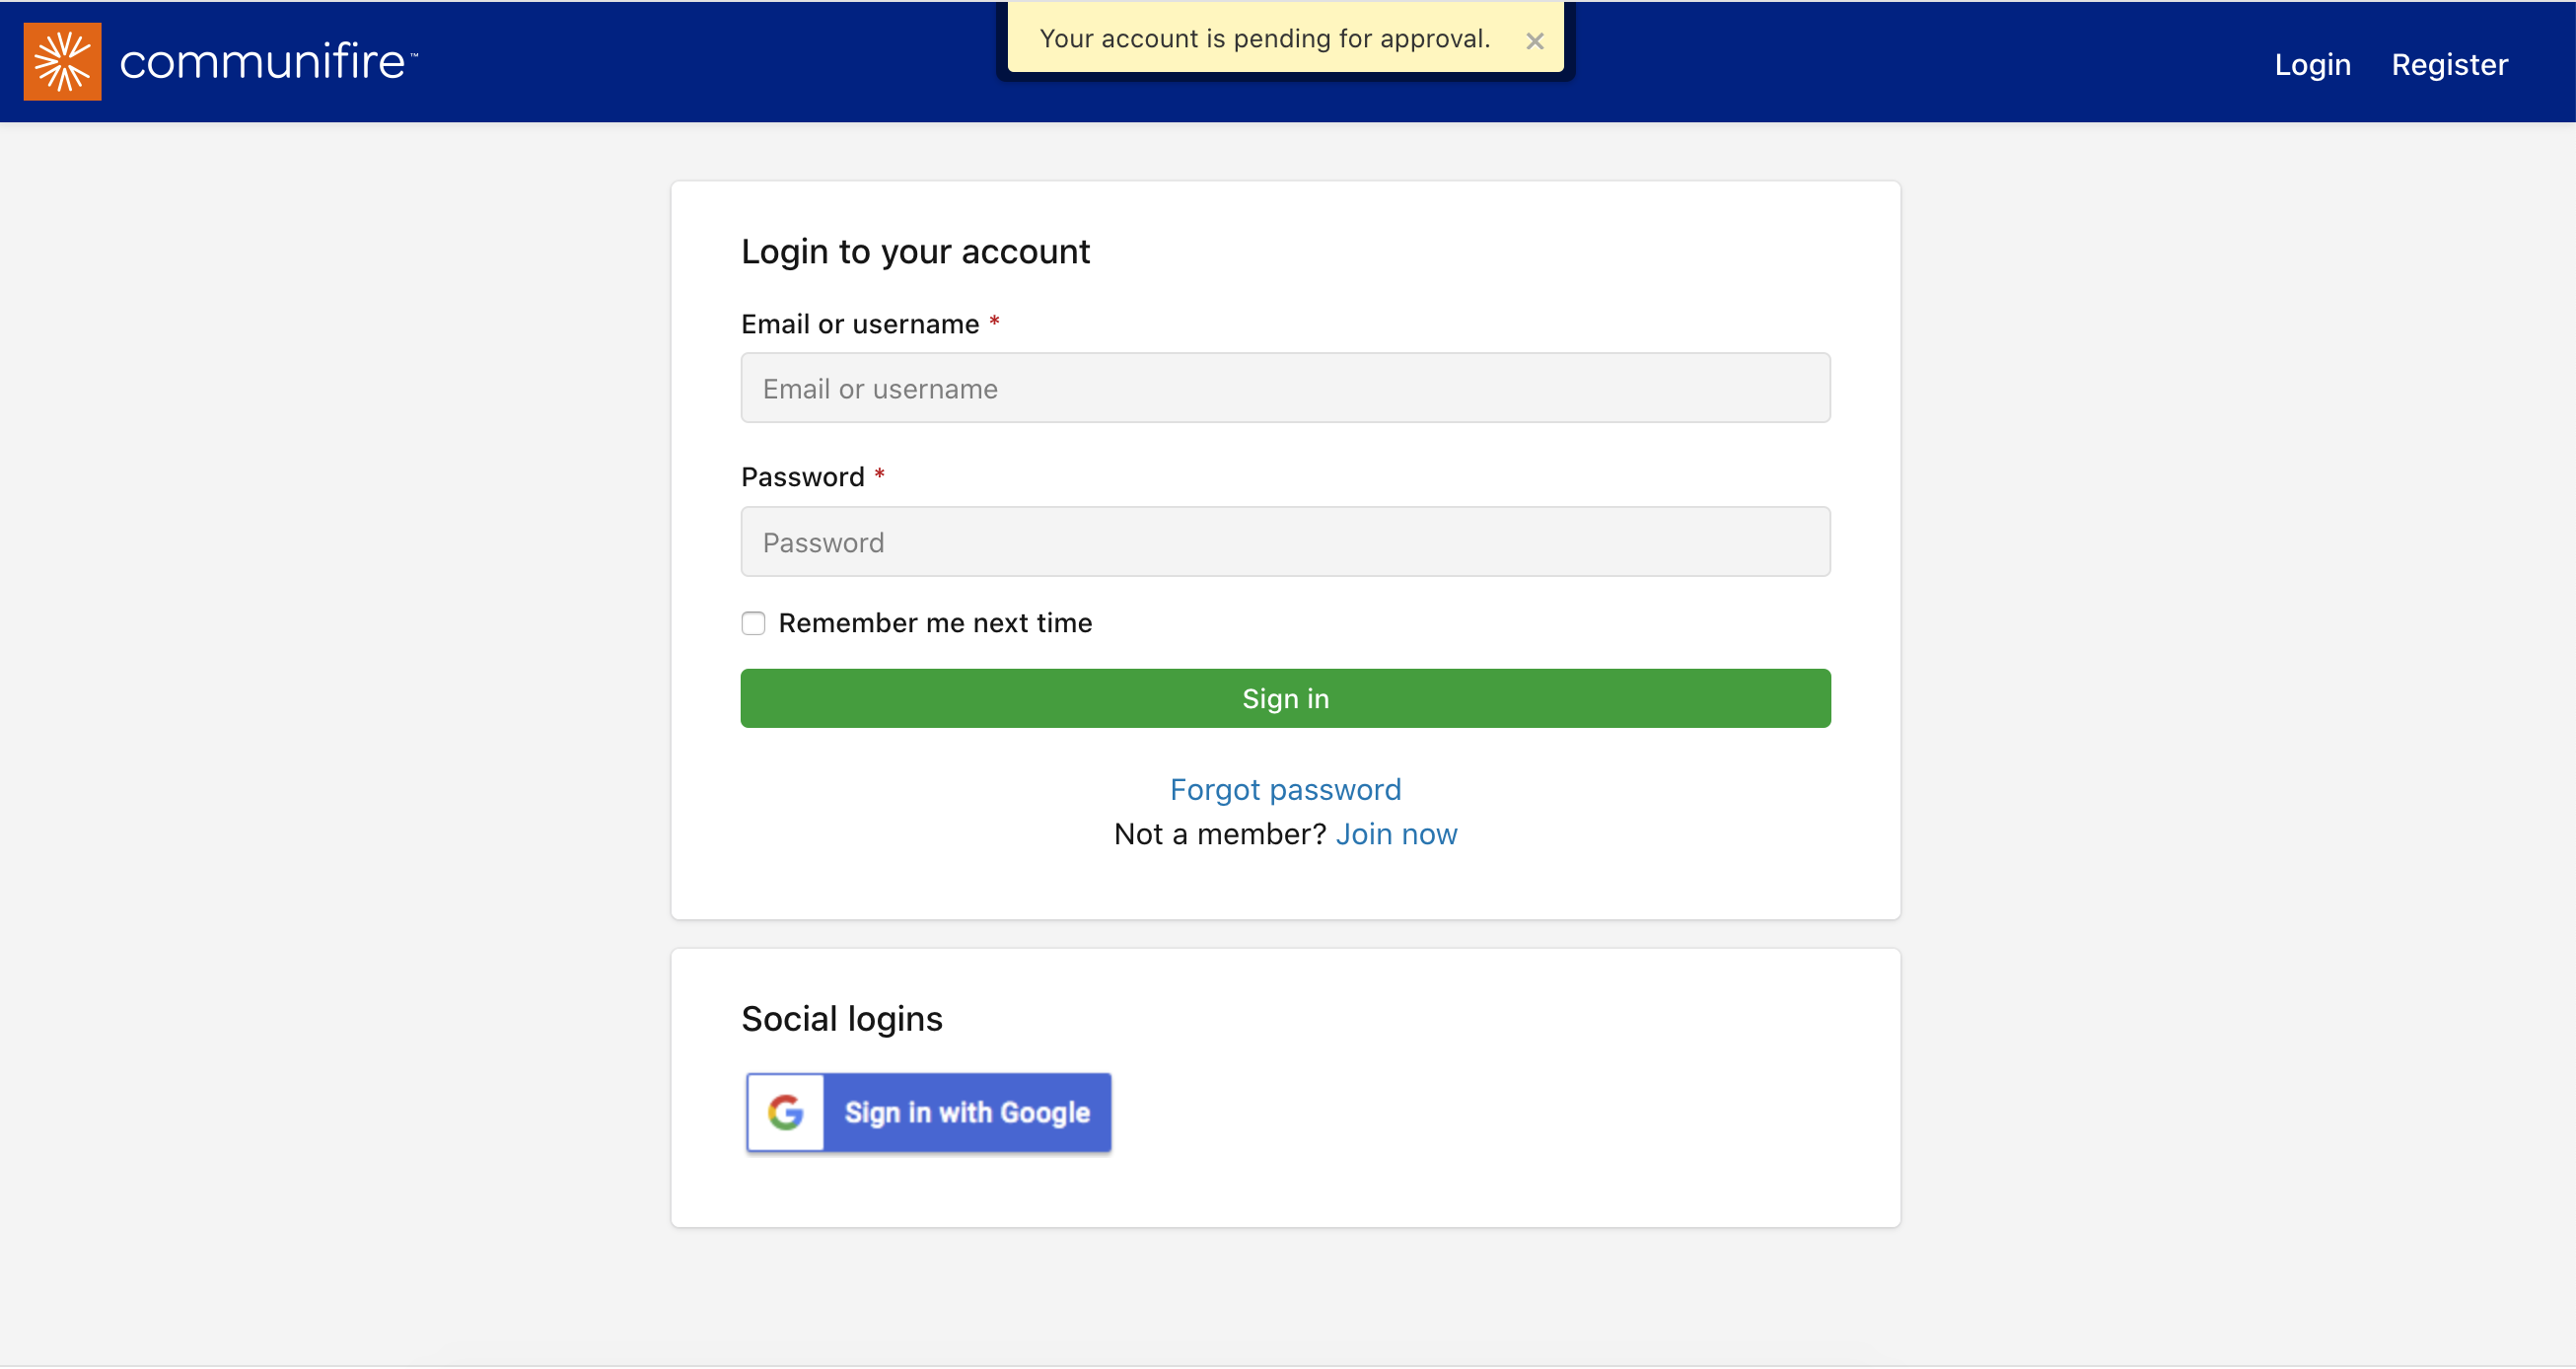 Login page with "Your account is pending approval" message